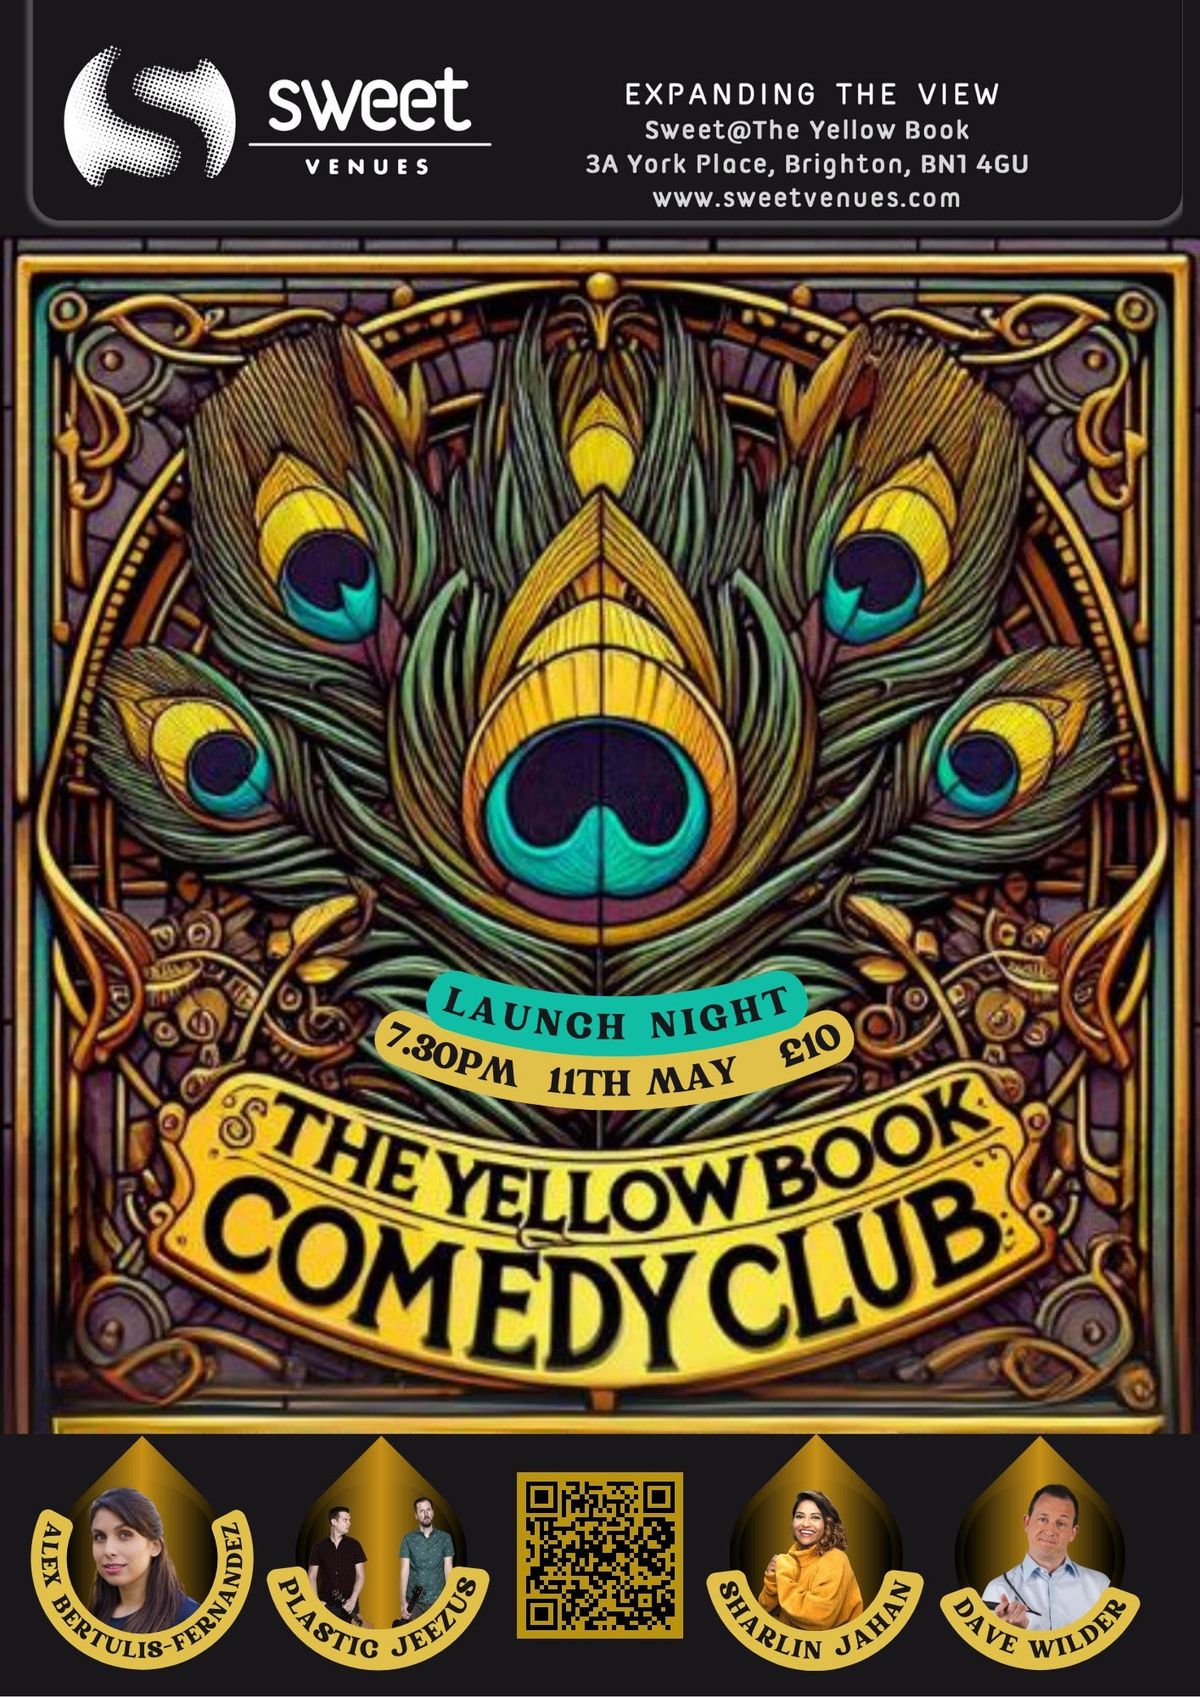 The Yellow Book Comedy Club - Launch!